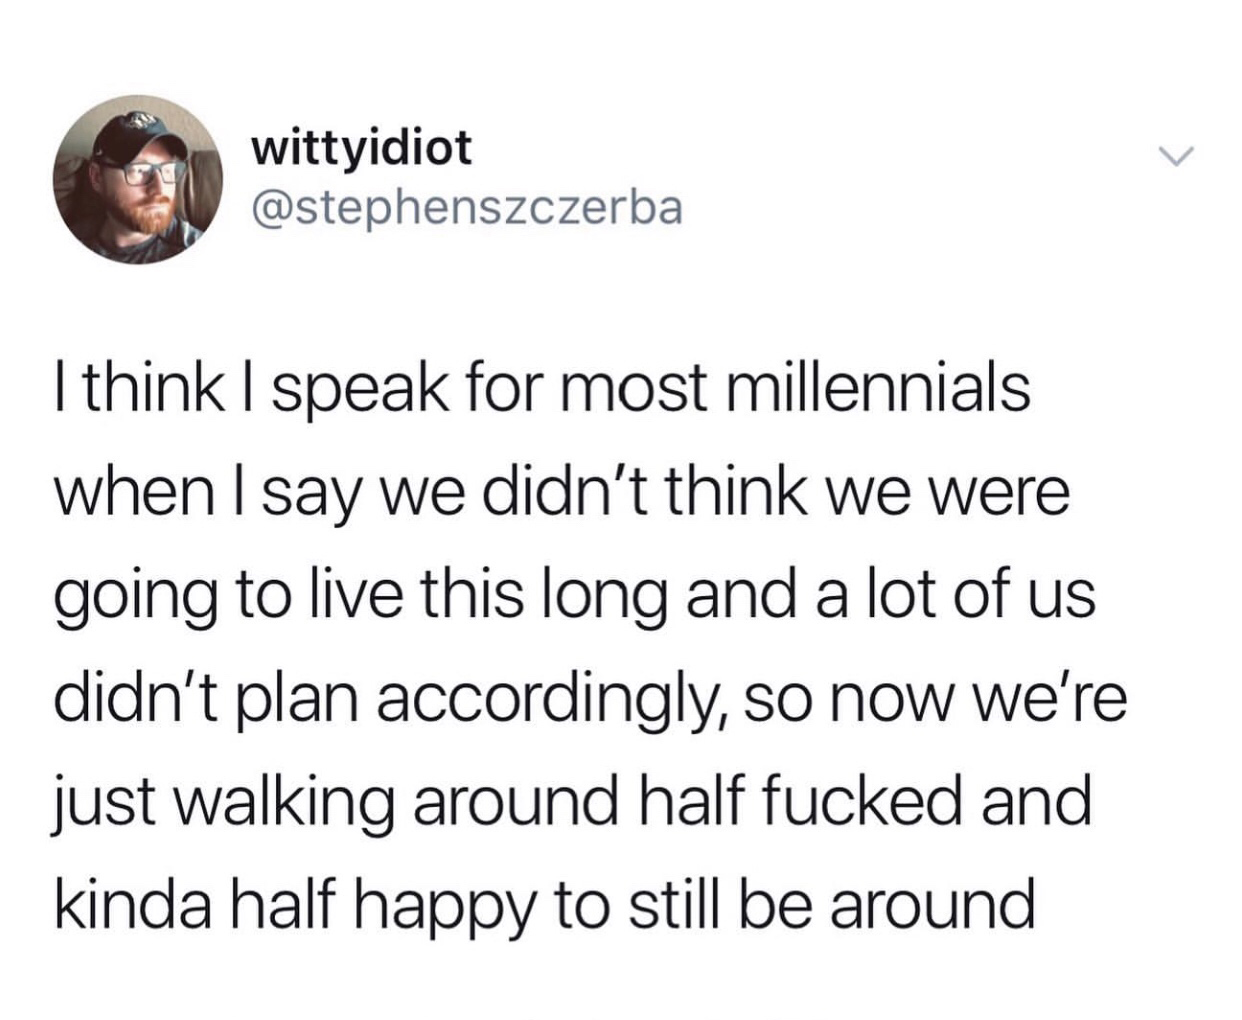 meme - calling kids assholes - wittyidiot I think I speak for most millennials when I say we didn't think we were going to live this long and a lot of us didn't plan accordingly, so now we're just walking around half fucked and kinda half happy to still b